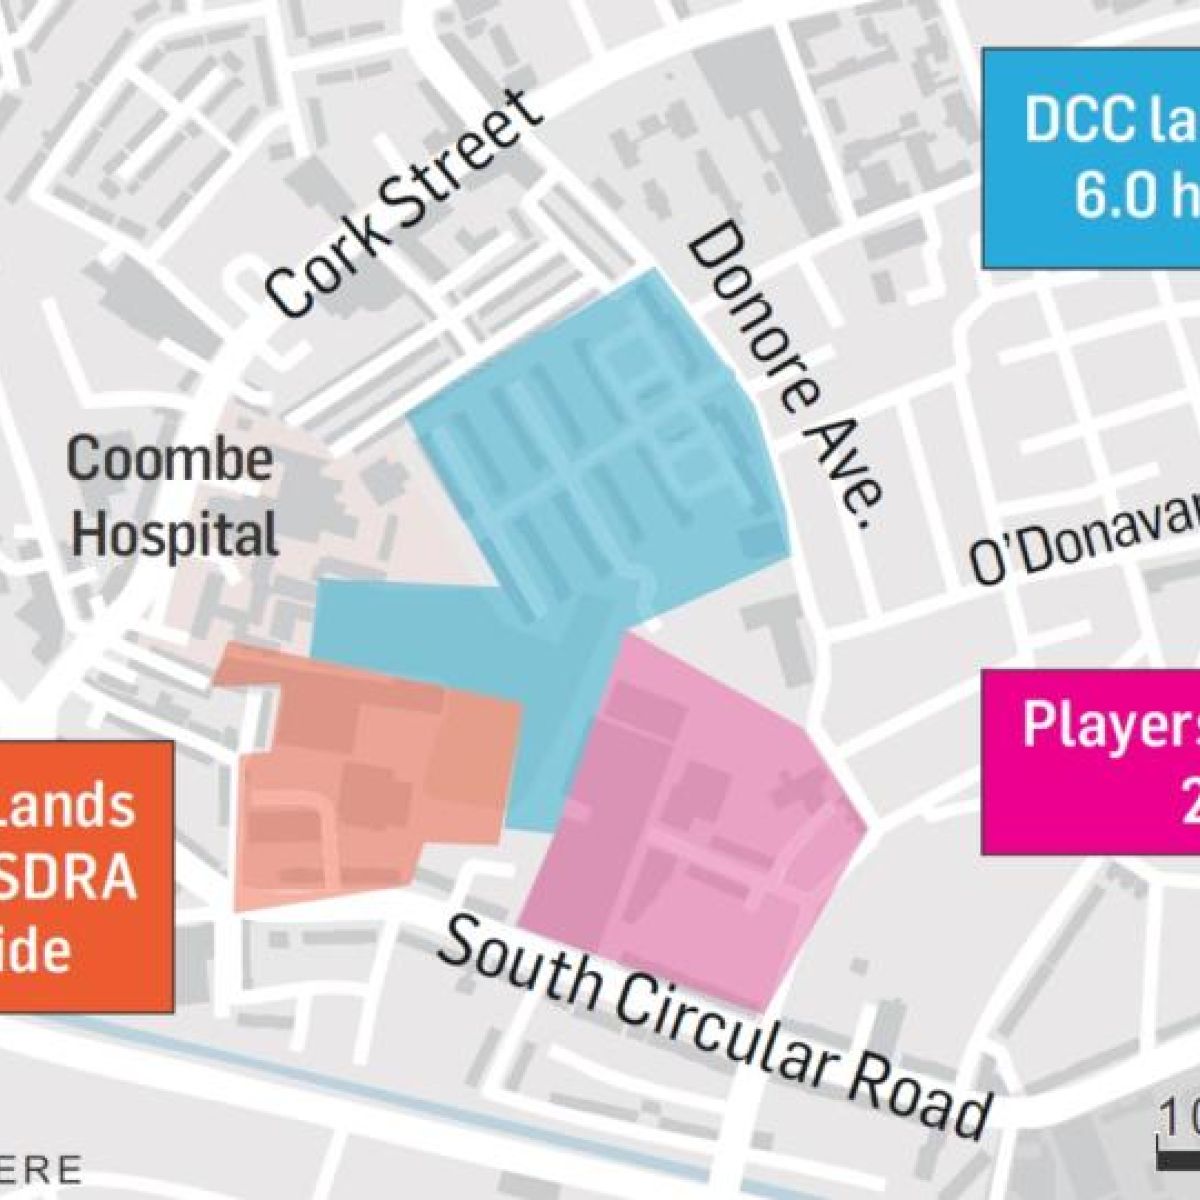 New Dublin Urban Quarter Will Have More Than 1000 Homes